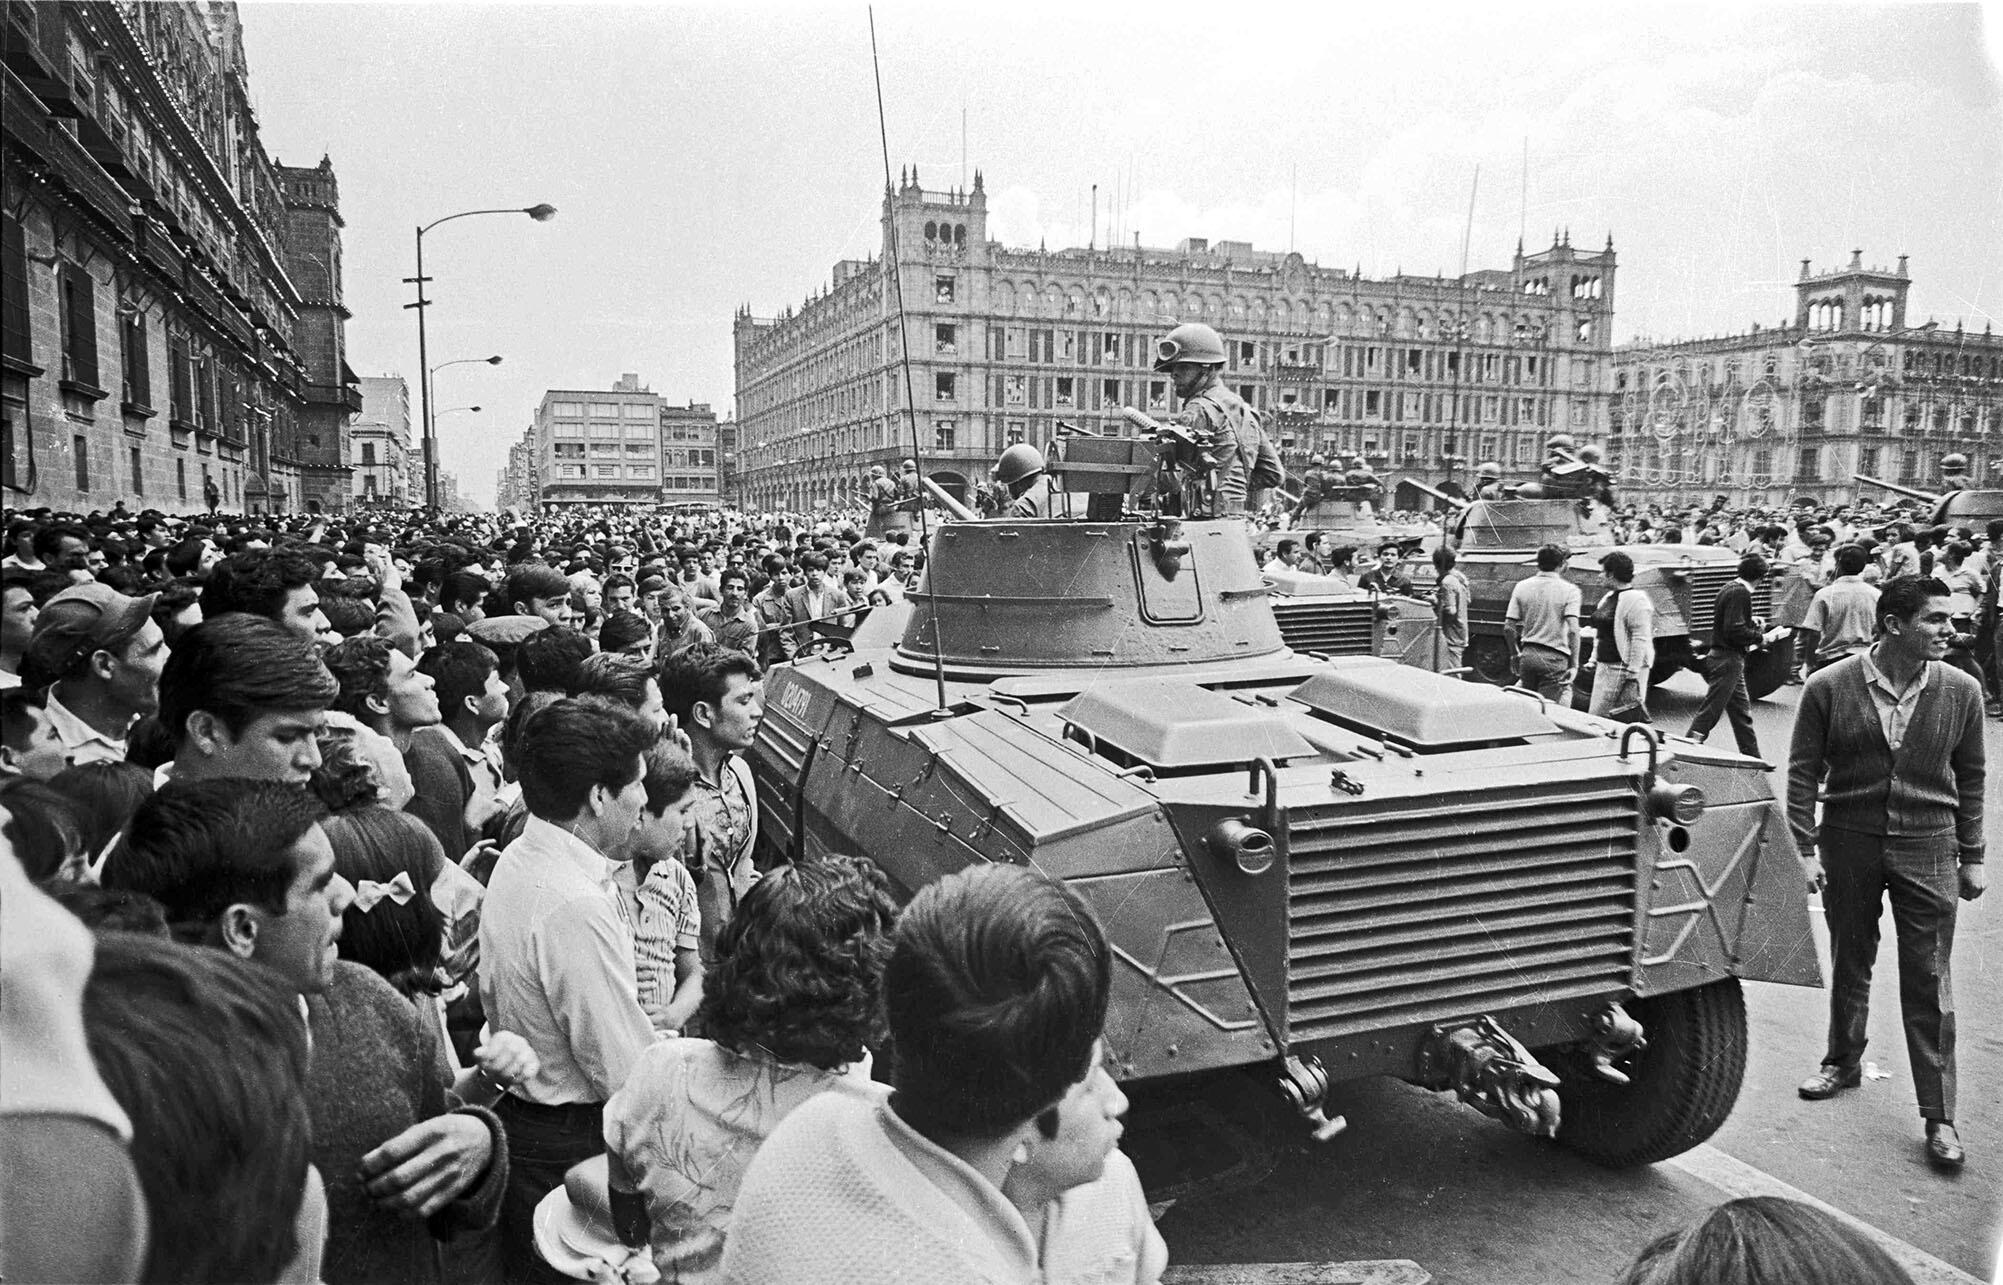 Mexican troops in armored personnel carriers confront demonstrators in the days leading up to the Tlatelolco Massacre in 1968. (Photo from Cel-li/Wikimedia Commons.)